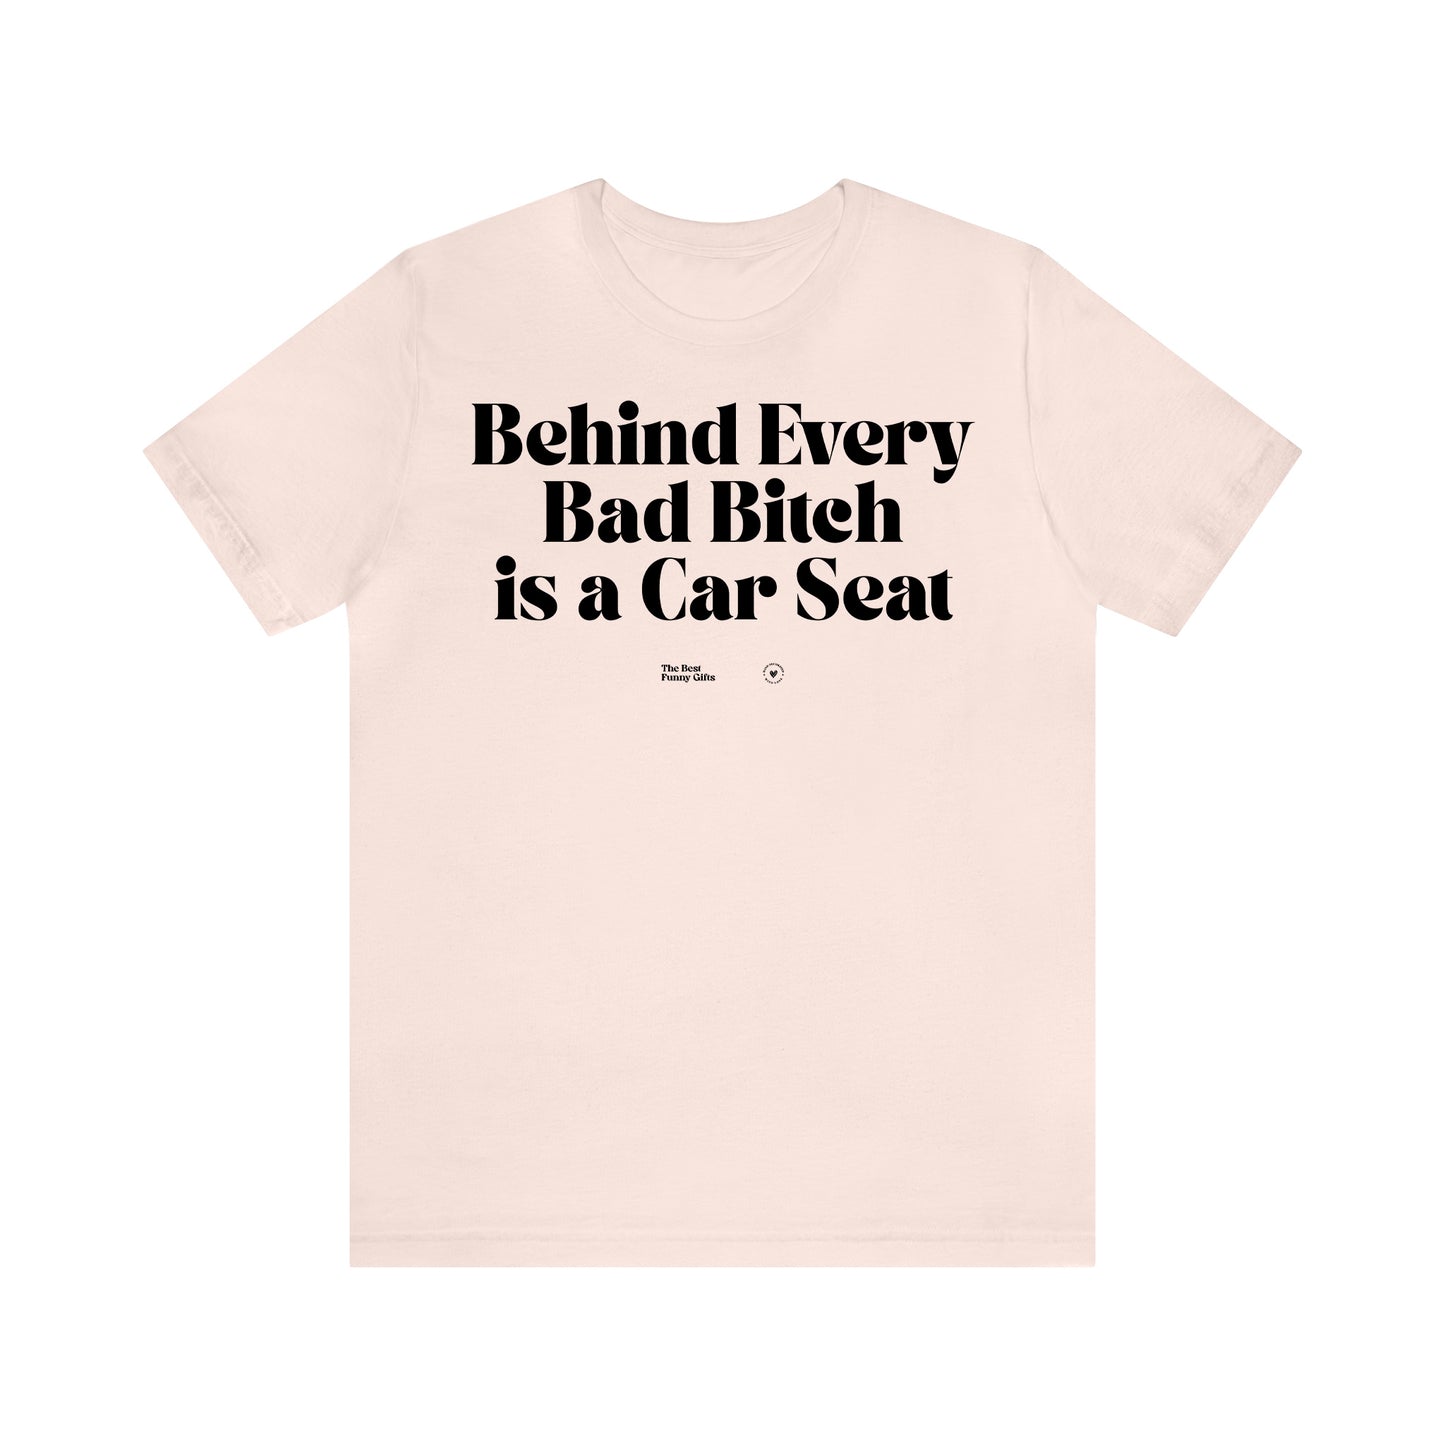 Funny Shirts for Women - Behind Every Bad Bitch is a Car Seat - Women’s T Shirts